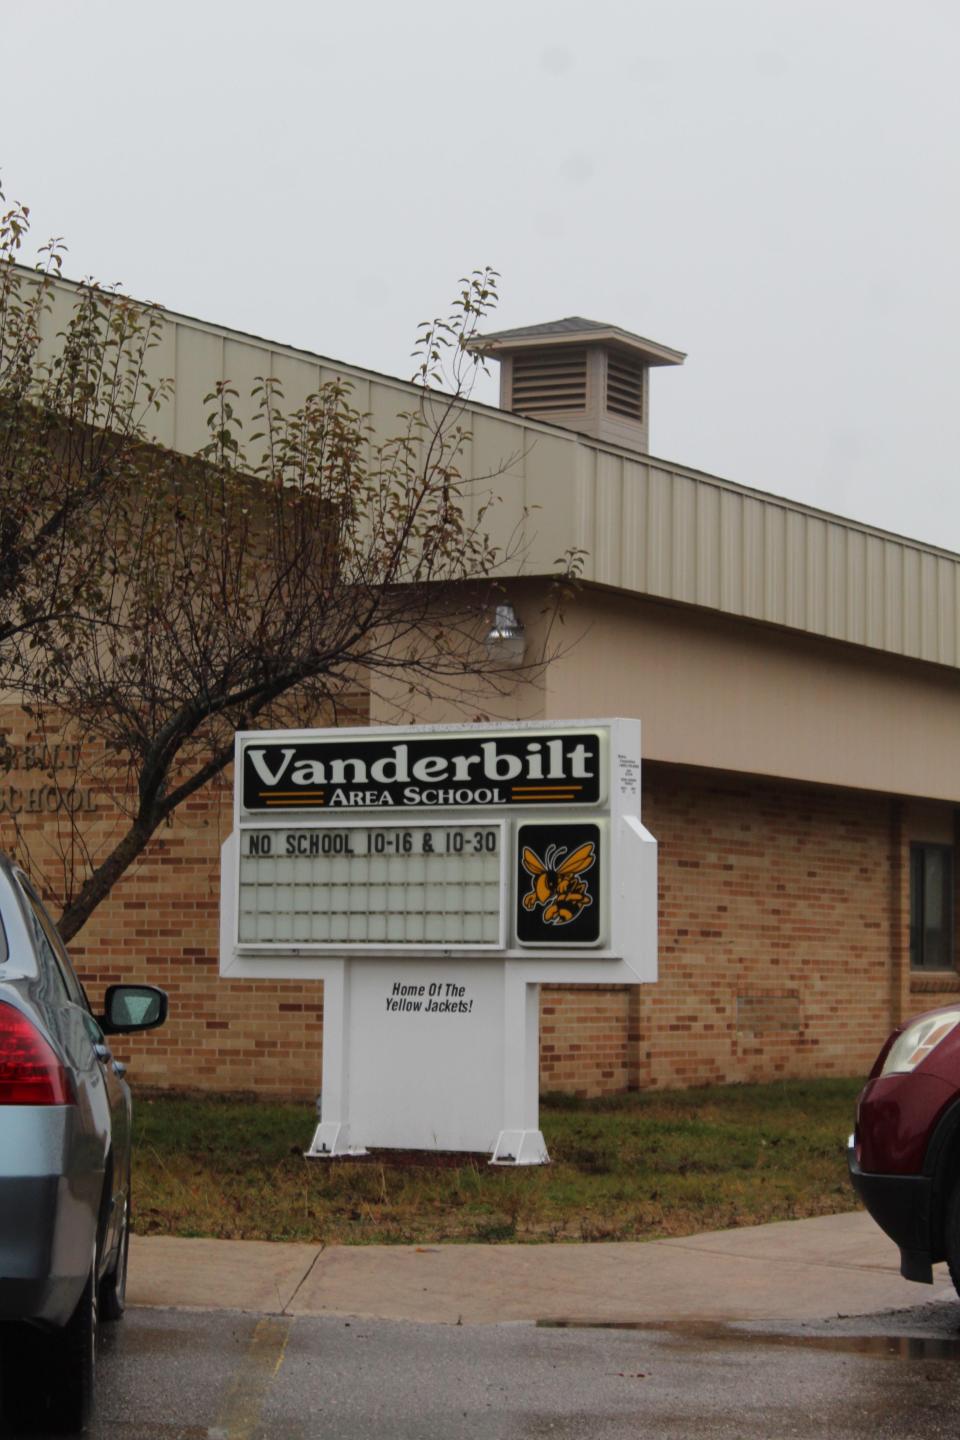 The Vanderbilt Area School has been awarded a grant to establish an adult education program which will enable those over 18 the opportunity to earn a high school diploma or GED.